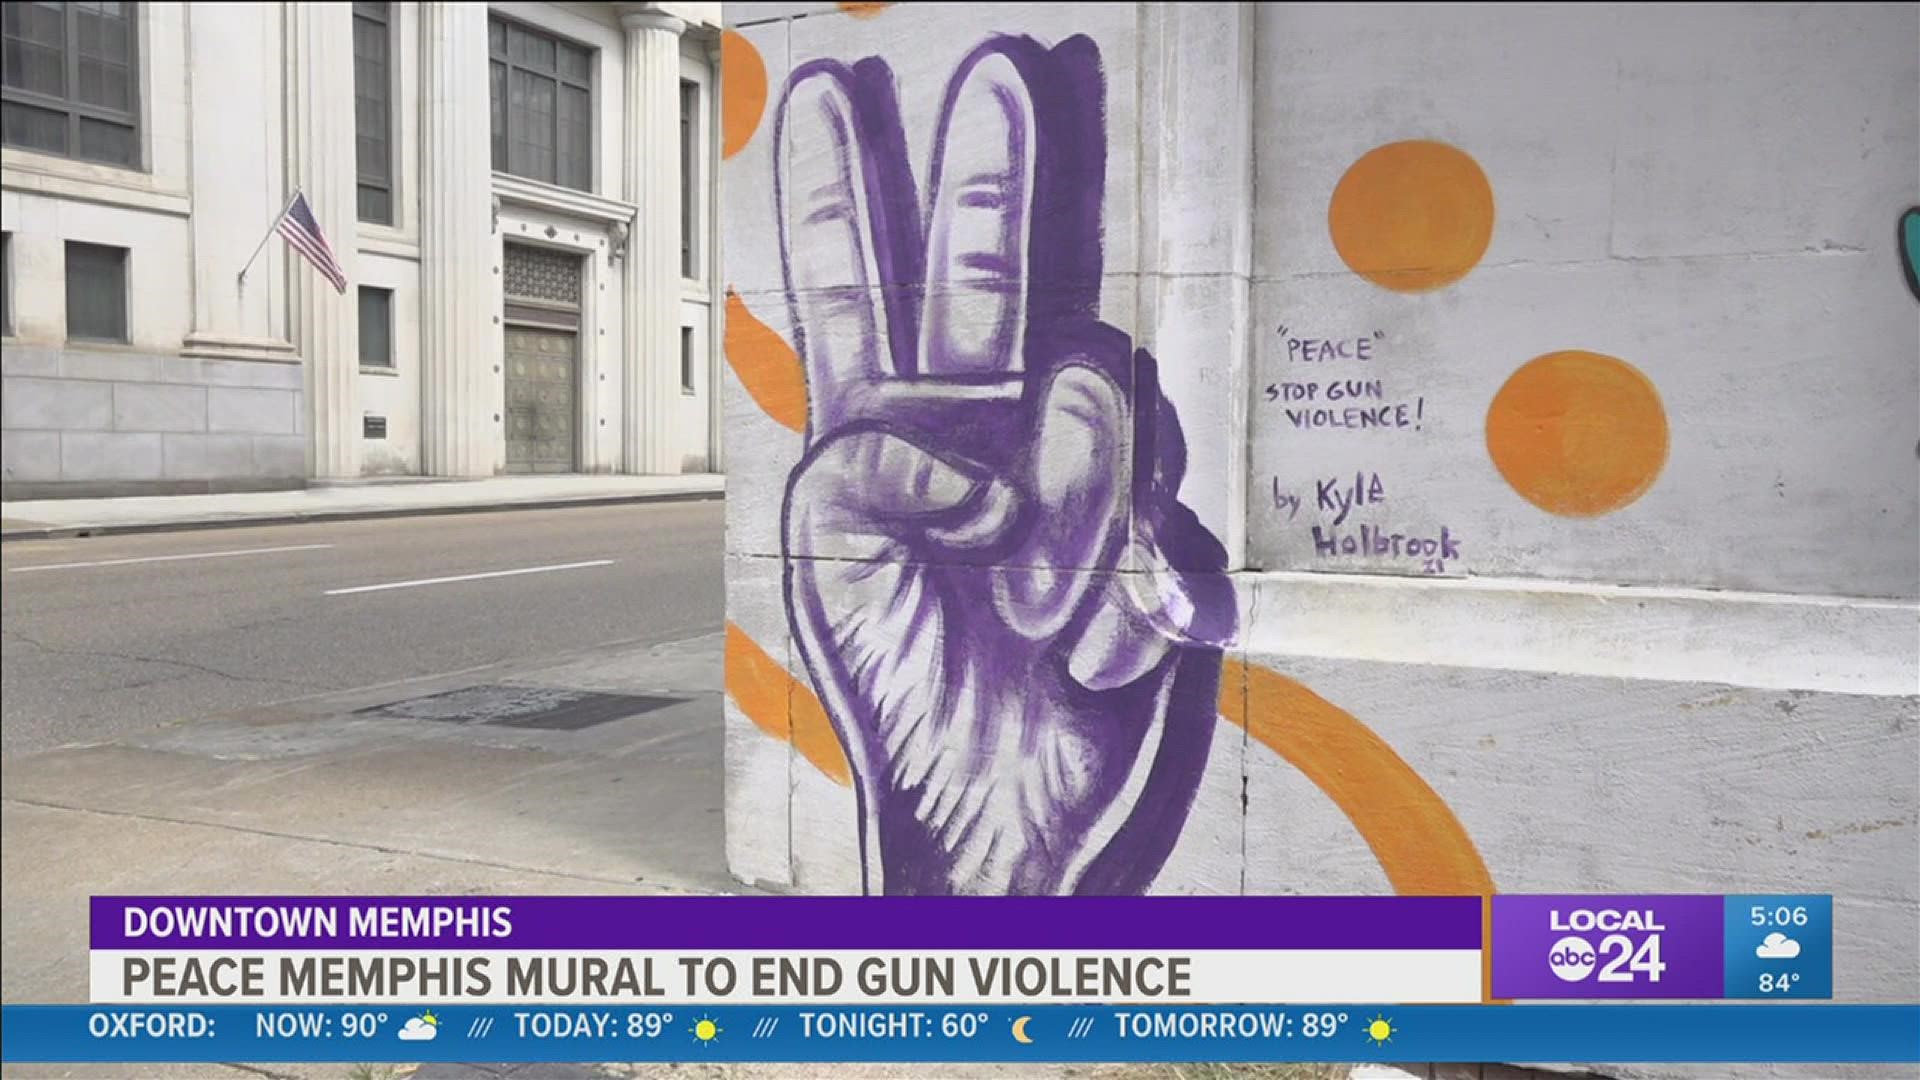 ‘Peace Memphis’ is part of a National Stop Gun Violence mural tour to all 50 states.